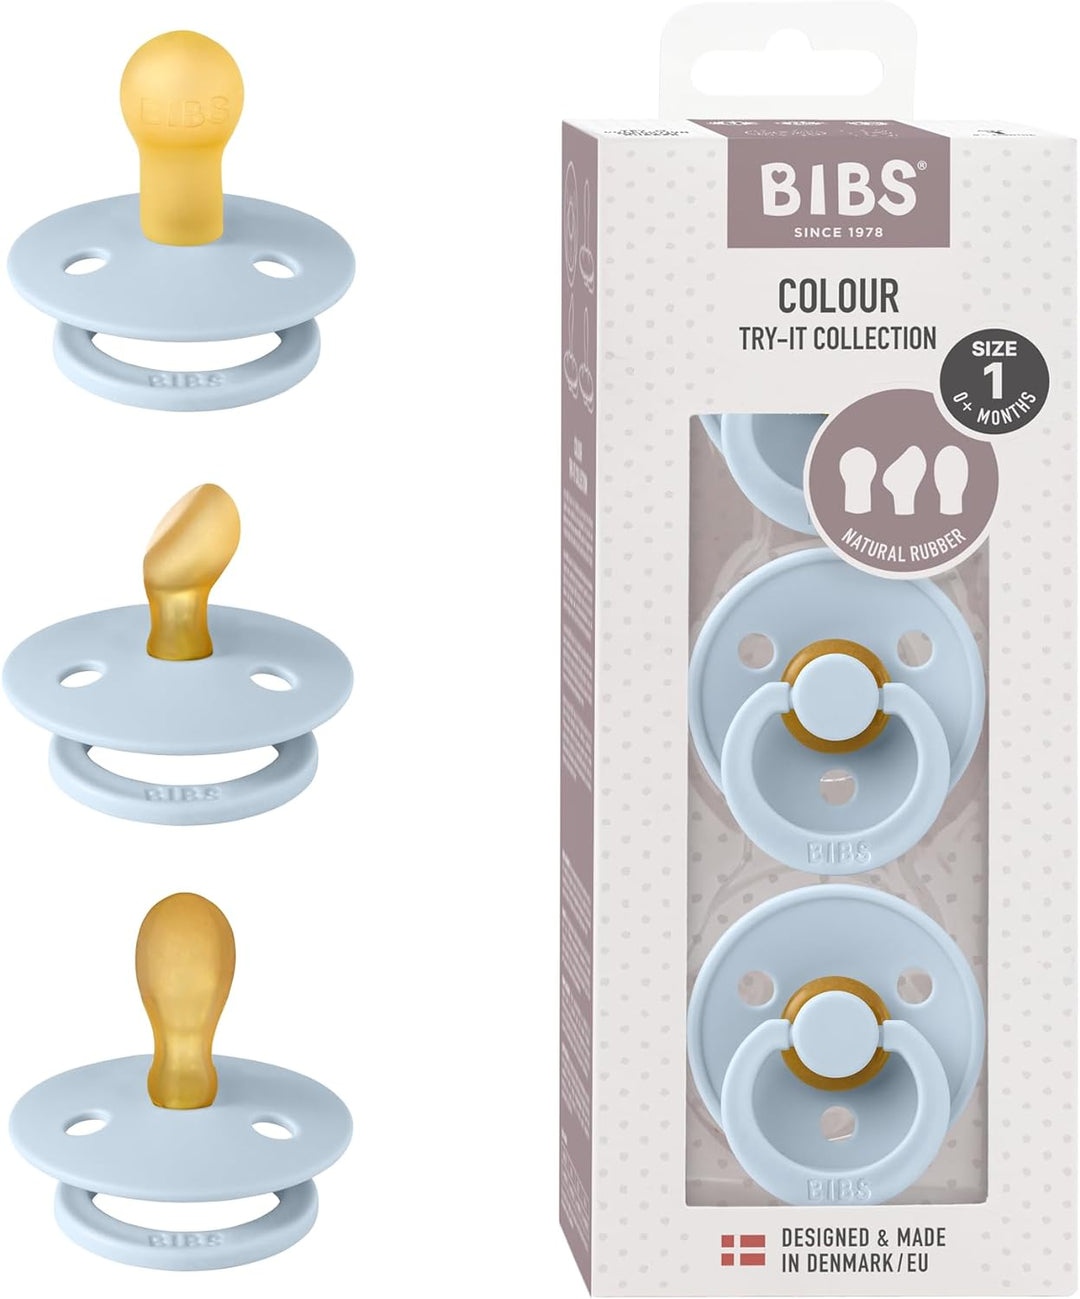 Baby Blue BIBS Colour Pacifiers - Try-It Collection - Pack of 3 by BIBS sold by Just Børn